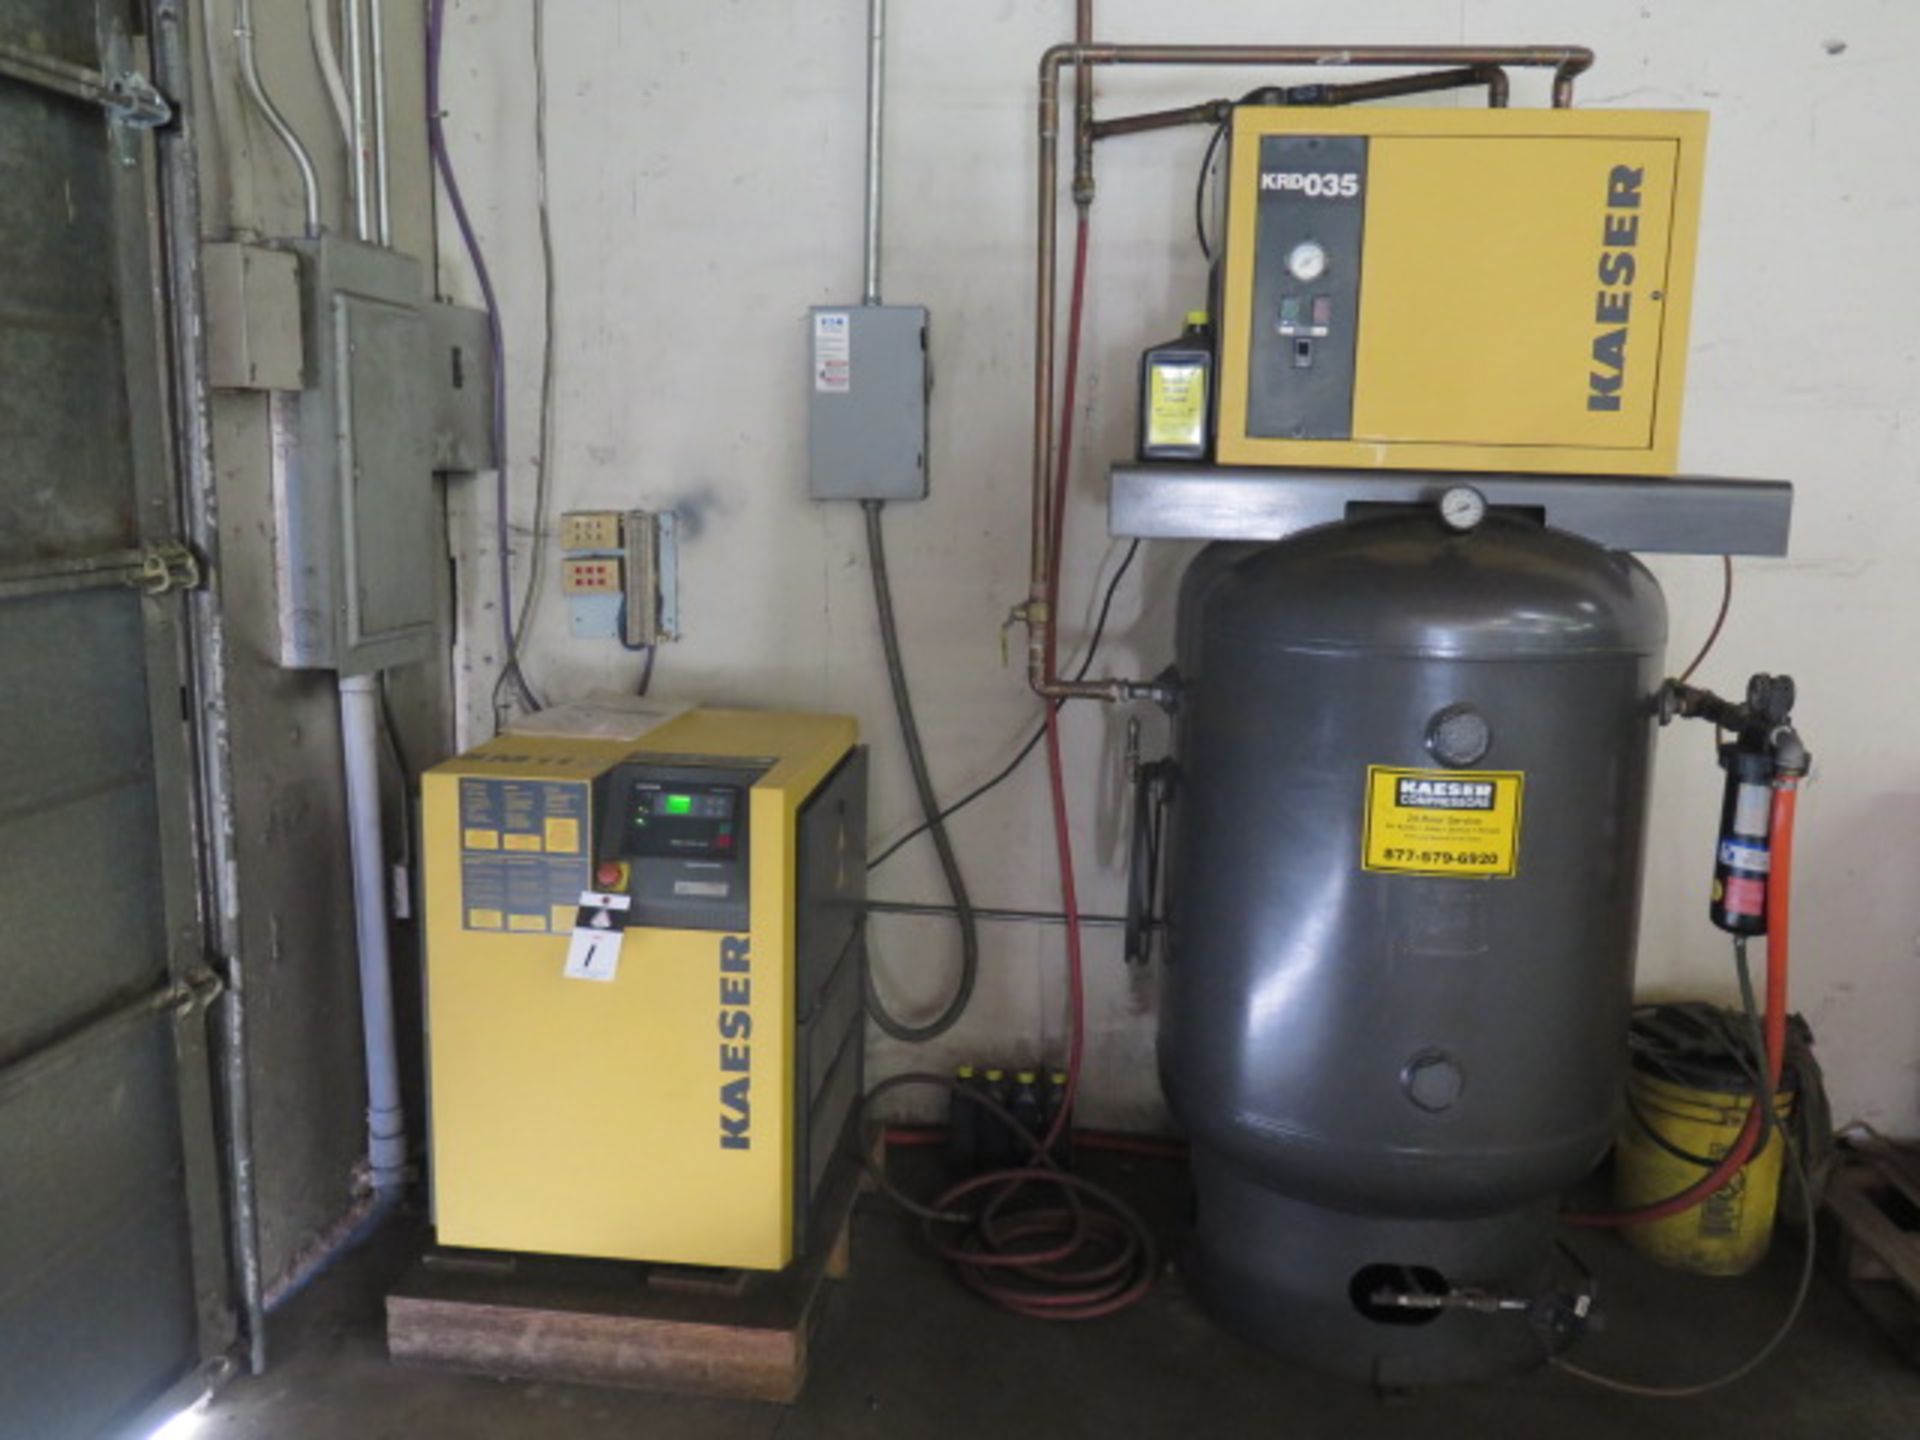 2006 Kaeser SM11 10Hp Rotary Air Compressor s/n 1220 w/ Dig Controls, 42 CFM @ 110 PSIG31,SOLD AS IS